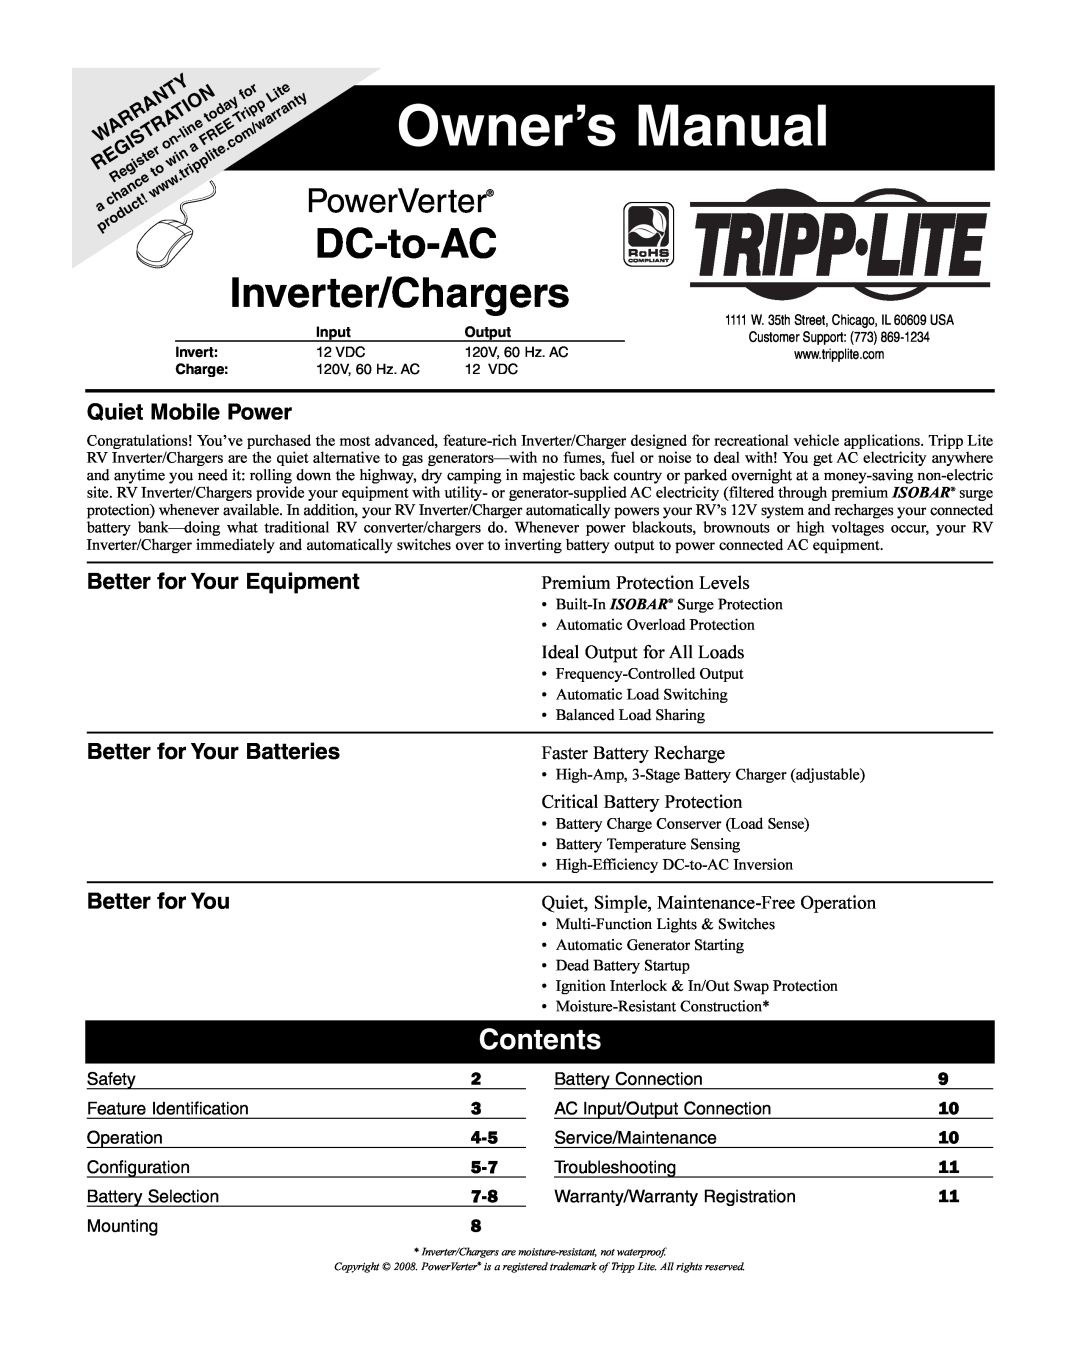 Tripp Lite 200712159 owner manual Contents, Quiet Mobile Power, Better for Your Equipment, Better for Your Batteries 